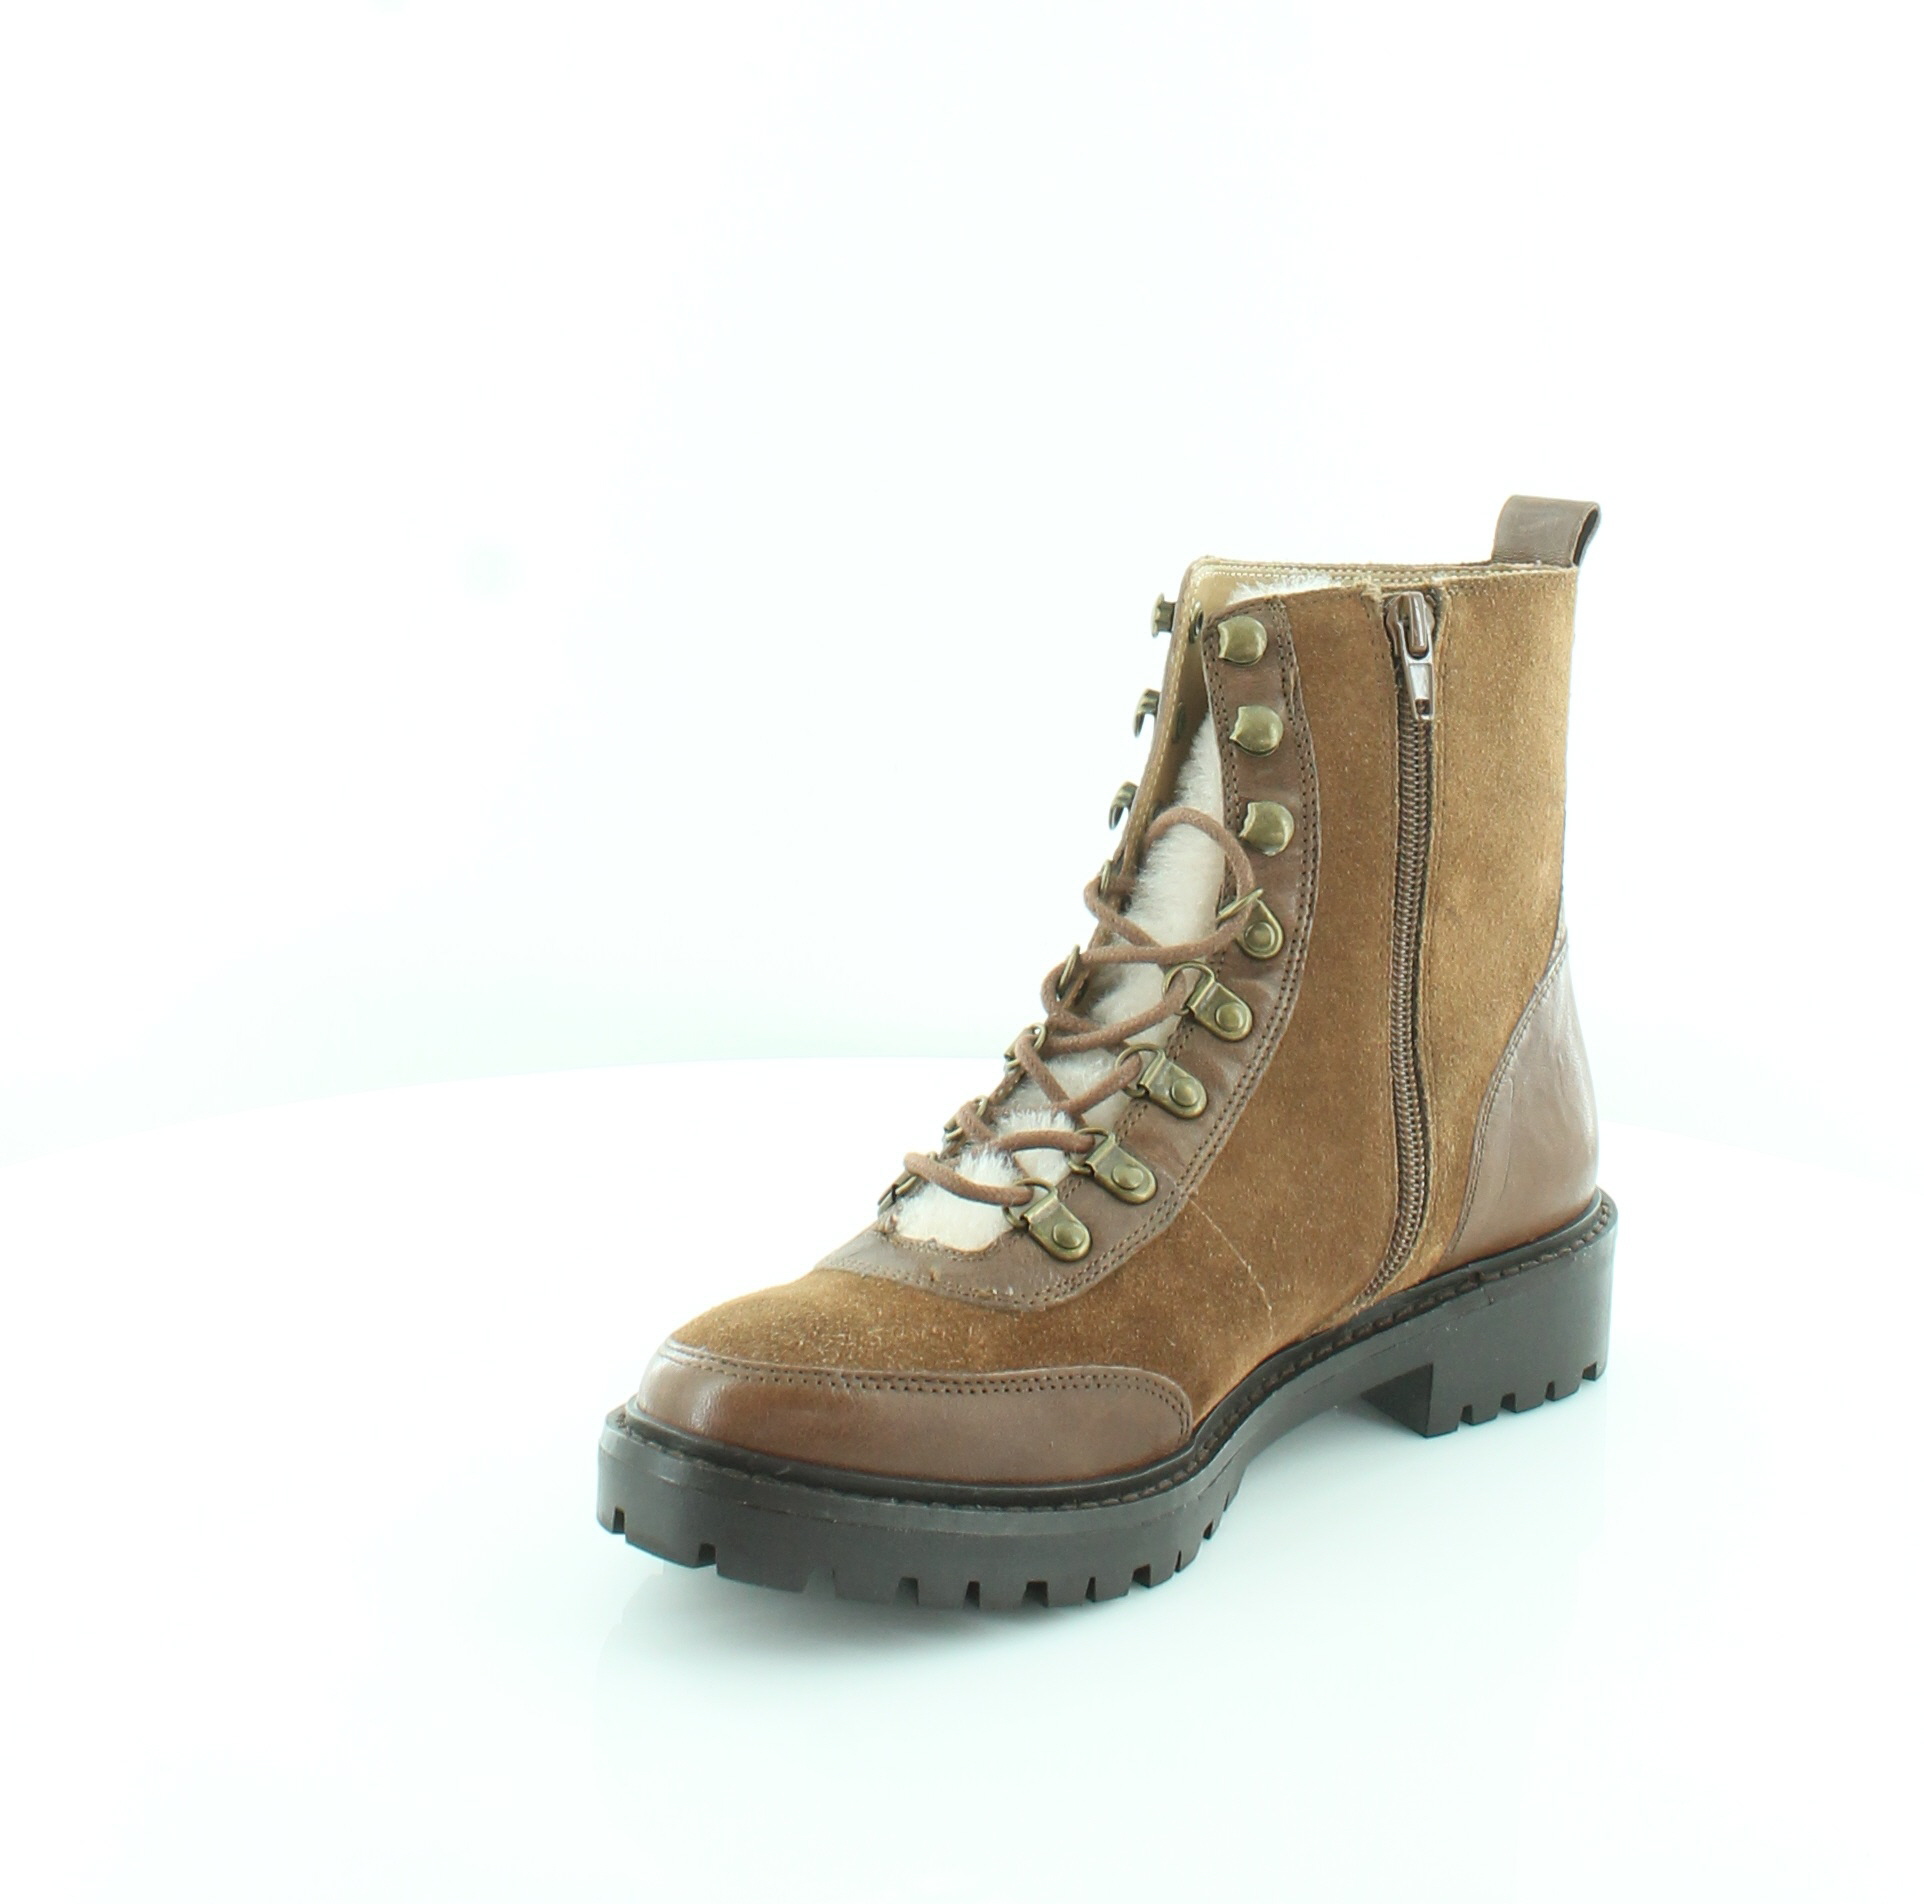 Belstaff Astel Brown Womens Shoes Size 7 M BOOTS for sale online | eBay